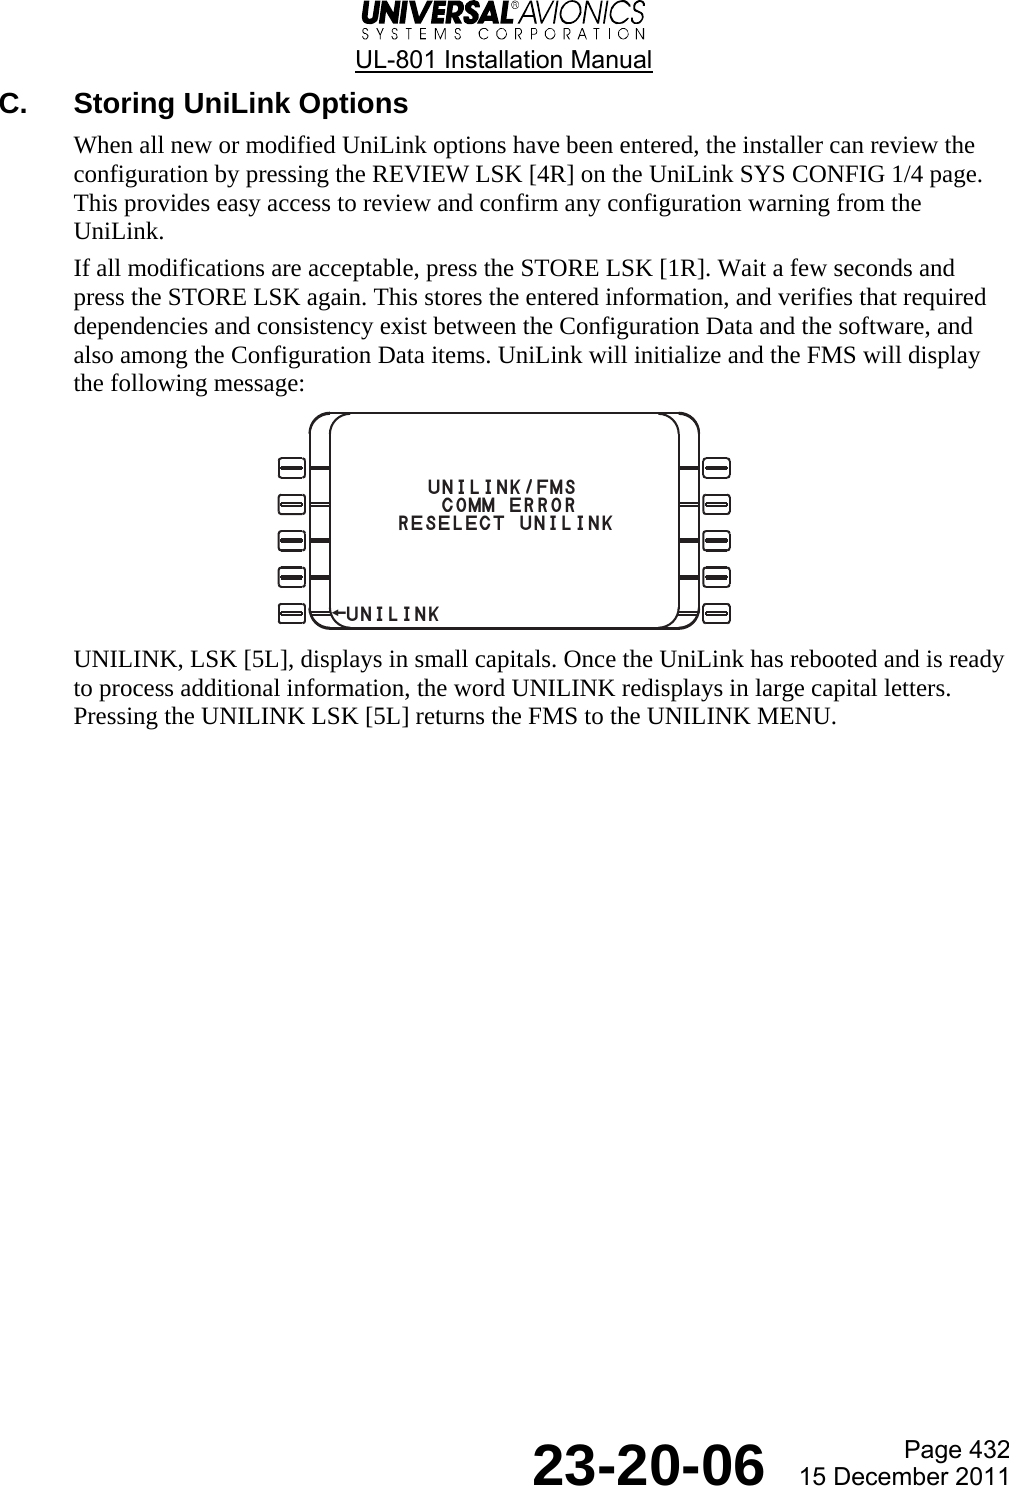  UL-801 Installation Manual  Page 432  23-20-06  15 December 2011 C.  Storing UniLink Options When all new or modified UniLink options have been entered, the installer can review the configuration by pressing the REVIEW LSK [4R] on the UniLink SYS CONFIG 1/4 page. This provides easy access to review and confirm any configuration warning from the UniLink. If all modifications are acceptable, press the STORE LSK [1R]. Wait a few seconds and press the STORE LSK again. This stores the entered information, and verifies that required dependencies and consistency exist between the Configuration Data and the software, and also among the Configuration Data items. UniLink will initialize and the FMS will display the following message:  UNILINK, LSK [5L], displays in small capitals. Once the UniLink has rebooted and is ready to process additional information, the word UNILINK redisplays in large capital letters. Pressing the UNILINK LSK [5L] returns the FMS to the UNILINK MENU.          UNILINK/FMS        COMM ERROR RESELECT UNILINK¬UNILINK